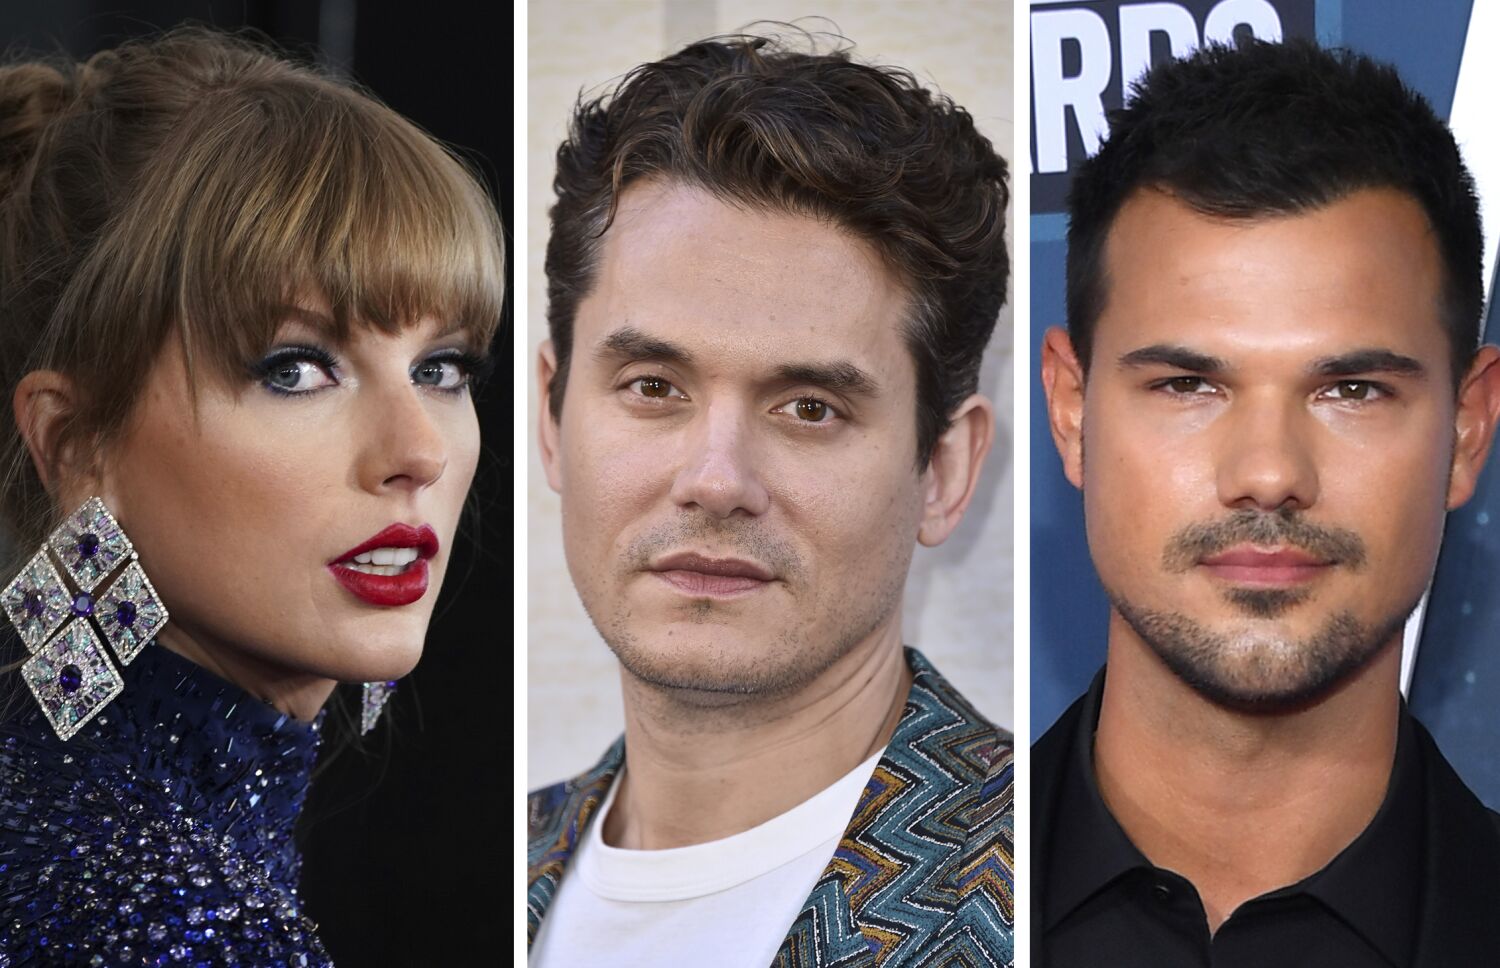 Taylor Swift's next album revisits John Mayer feud. For Taylor Lautner, that's too fun